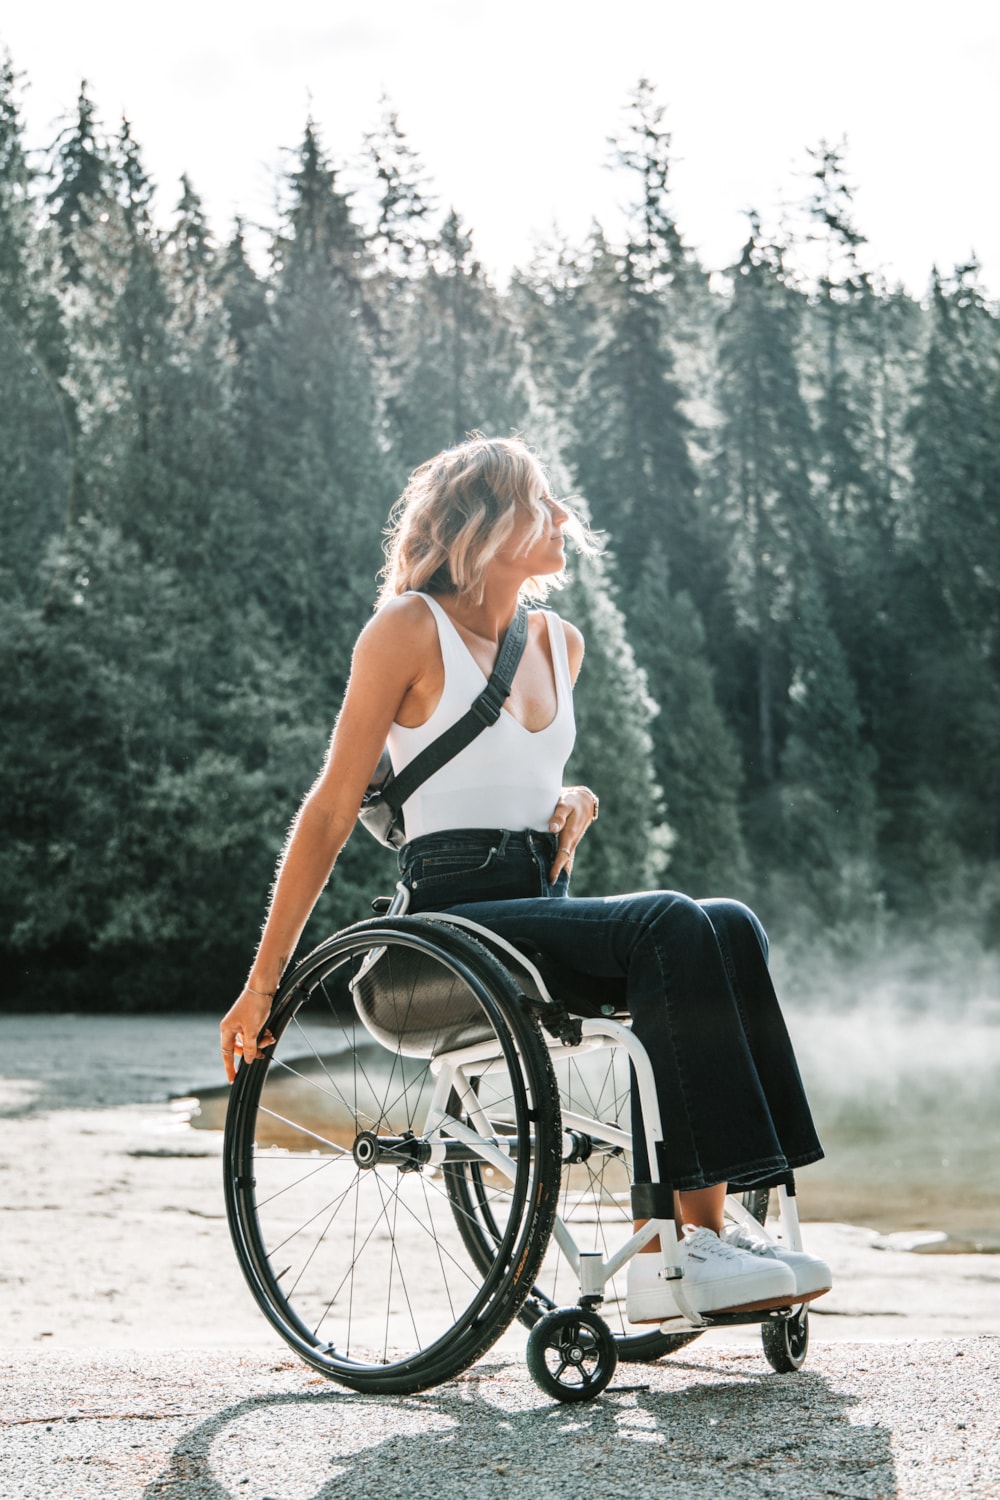 <p>Woman sitting in wheelchair outdoors in nature.</p>